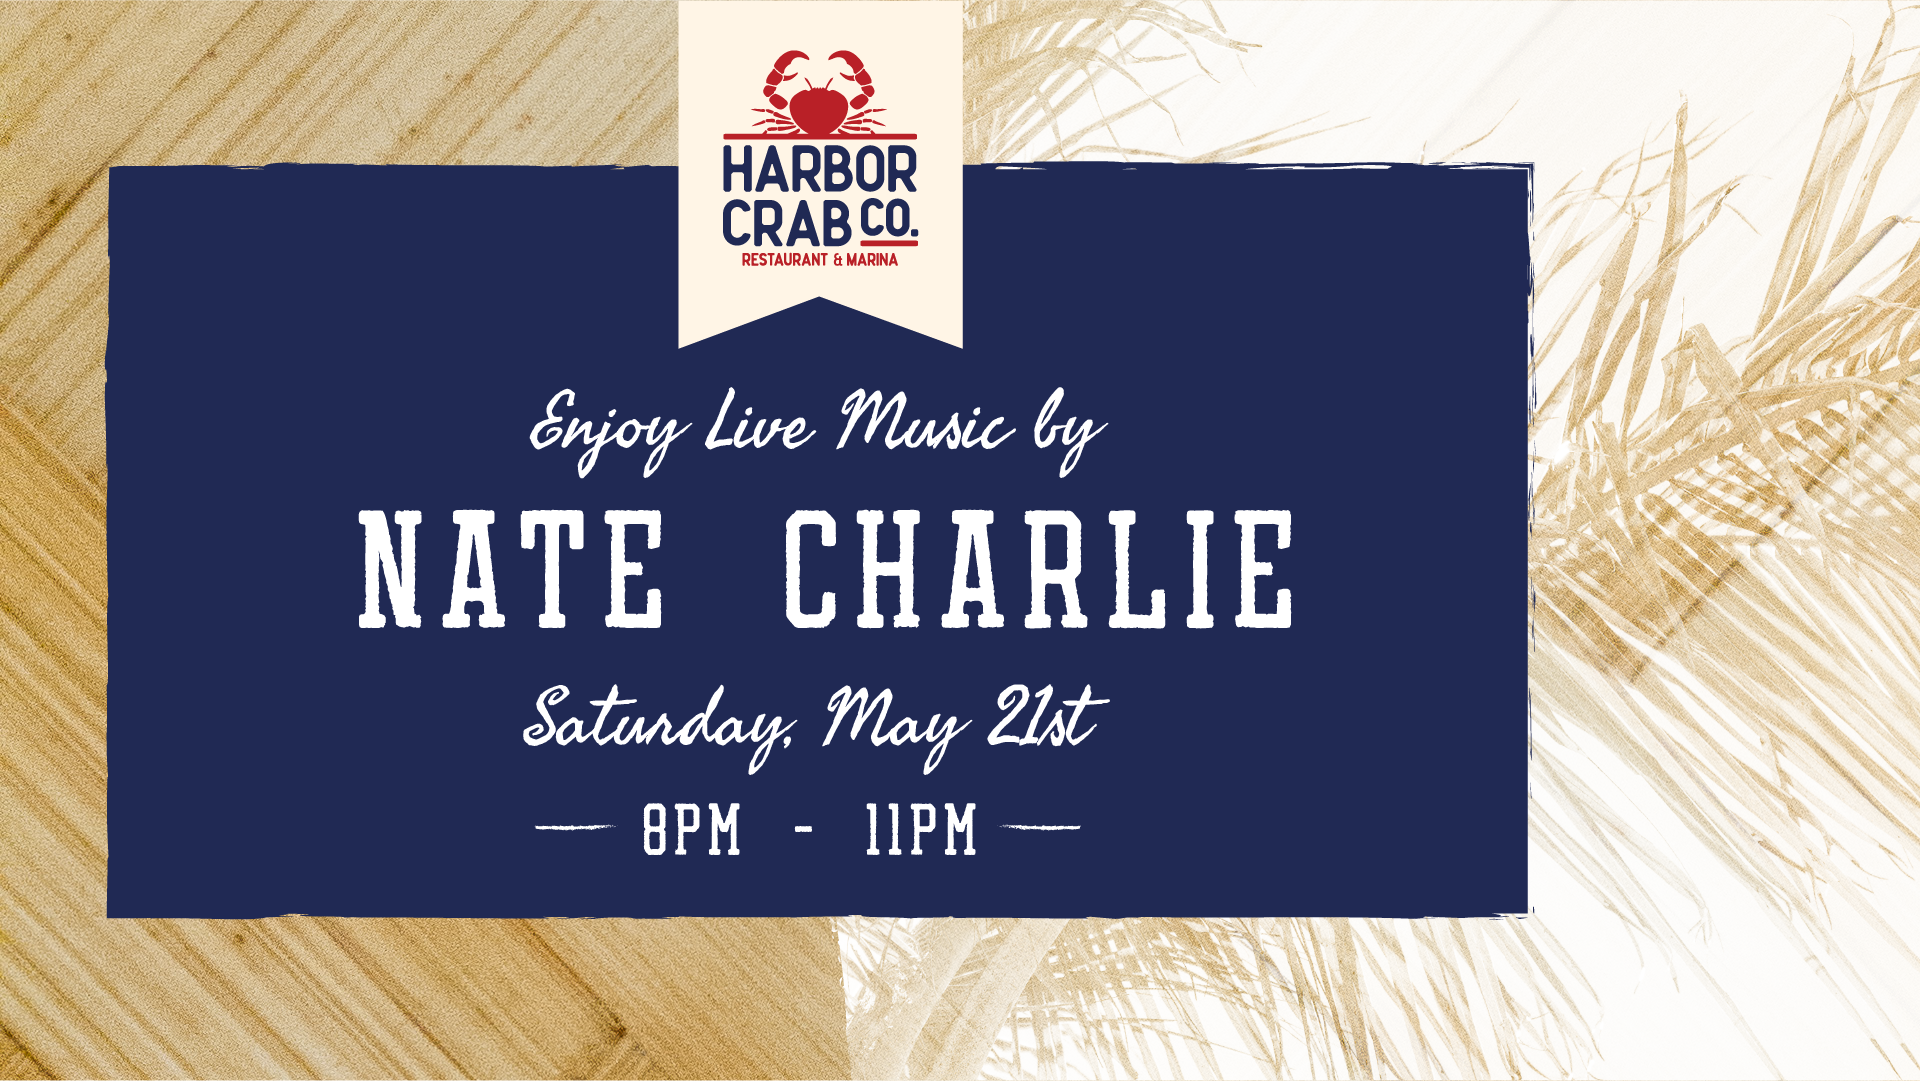 Flyer for Nate Charlie on Saturday, May 21st - 8:00pm